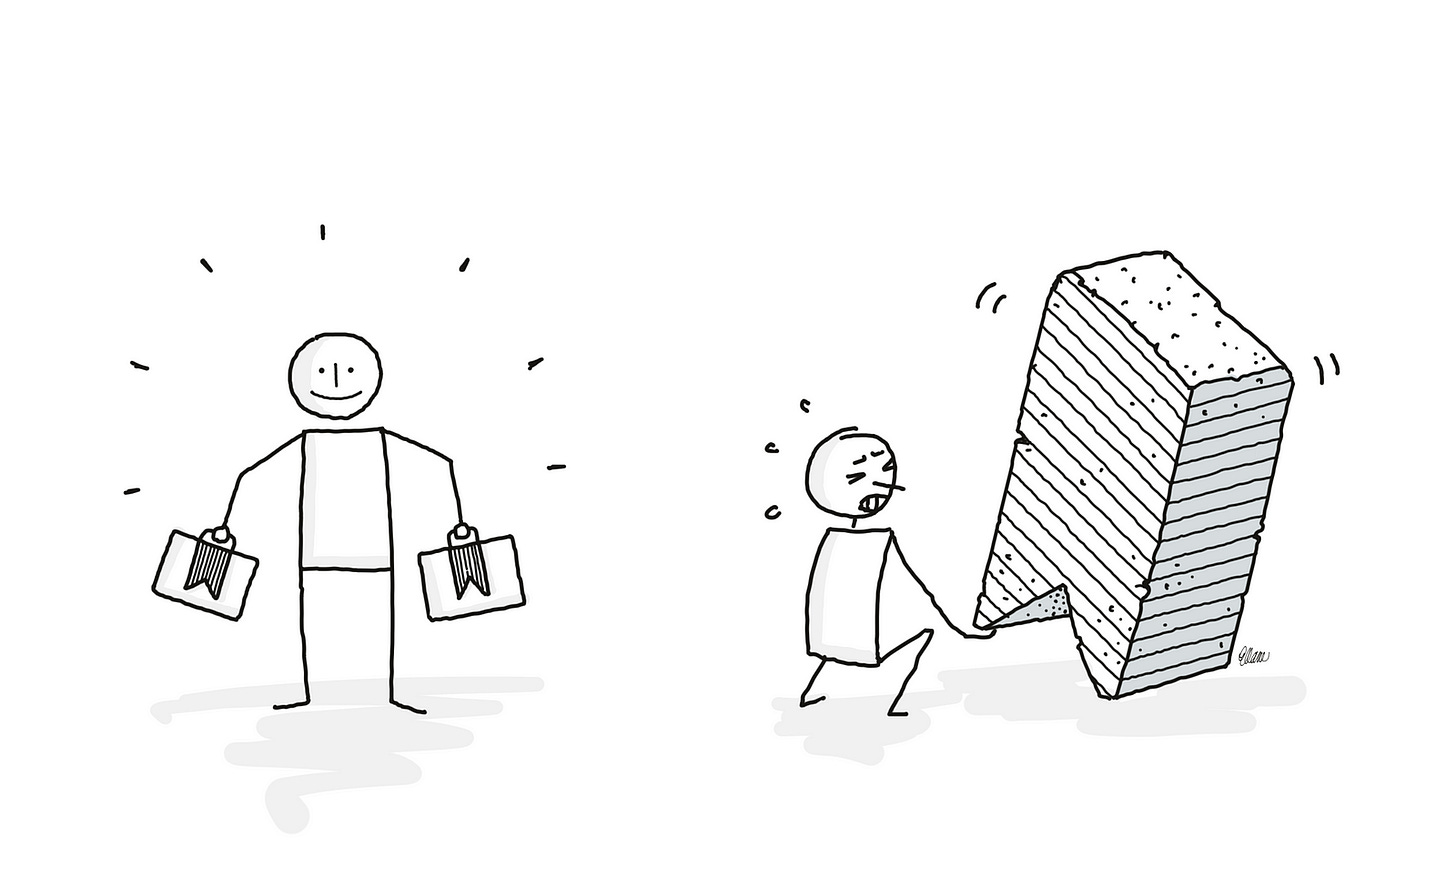 Black linework cartoon with grey shading of two figures, on a white background. One figure, on the left, is smiling while holding a briefcase in each hand. Each briefcase has a bookmark symbol on it. The other figure is squatting down, straining to lift a bookmark symbol that appears to be made of stone, and is larger than themselves.